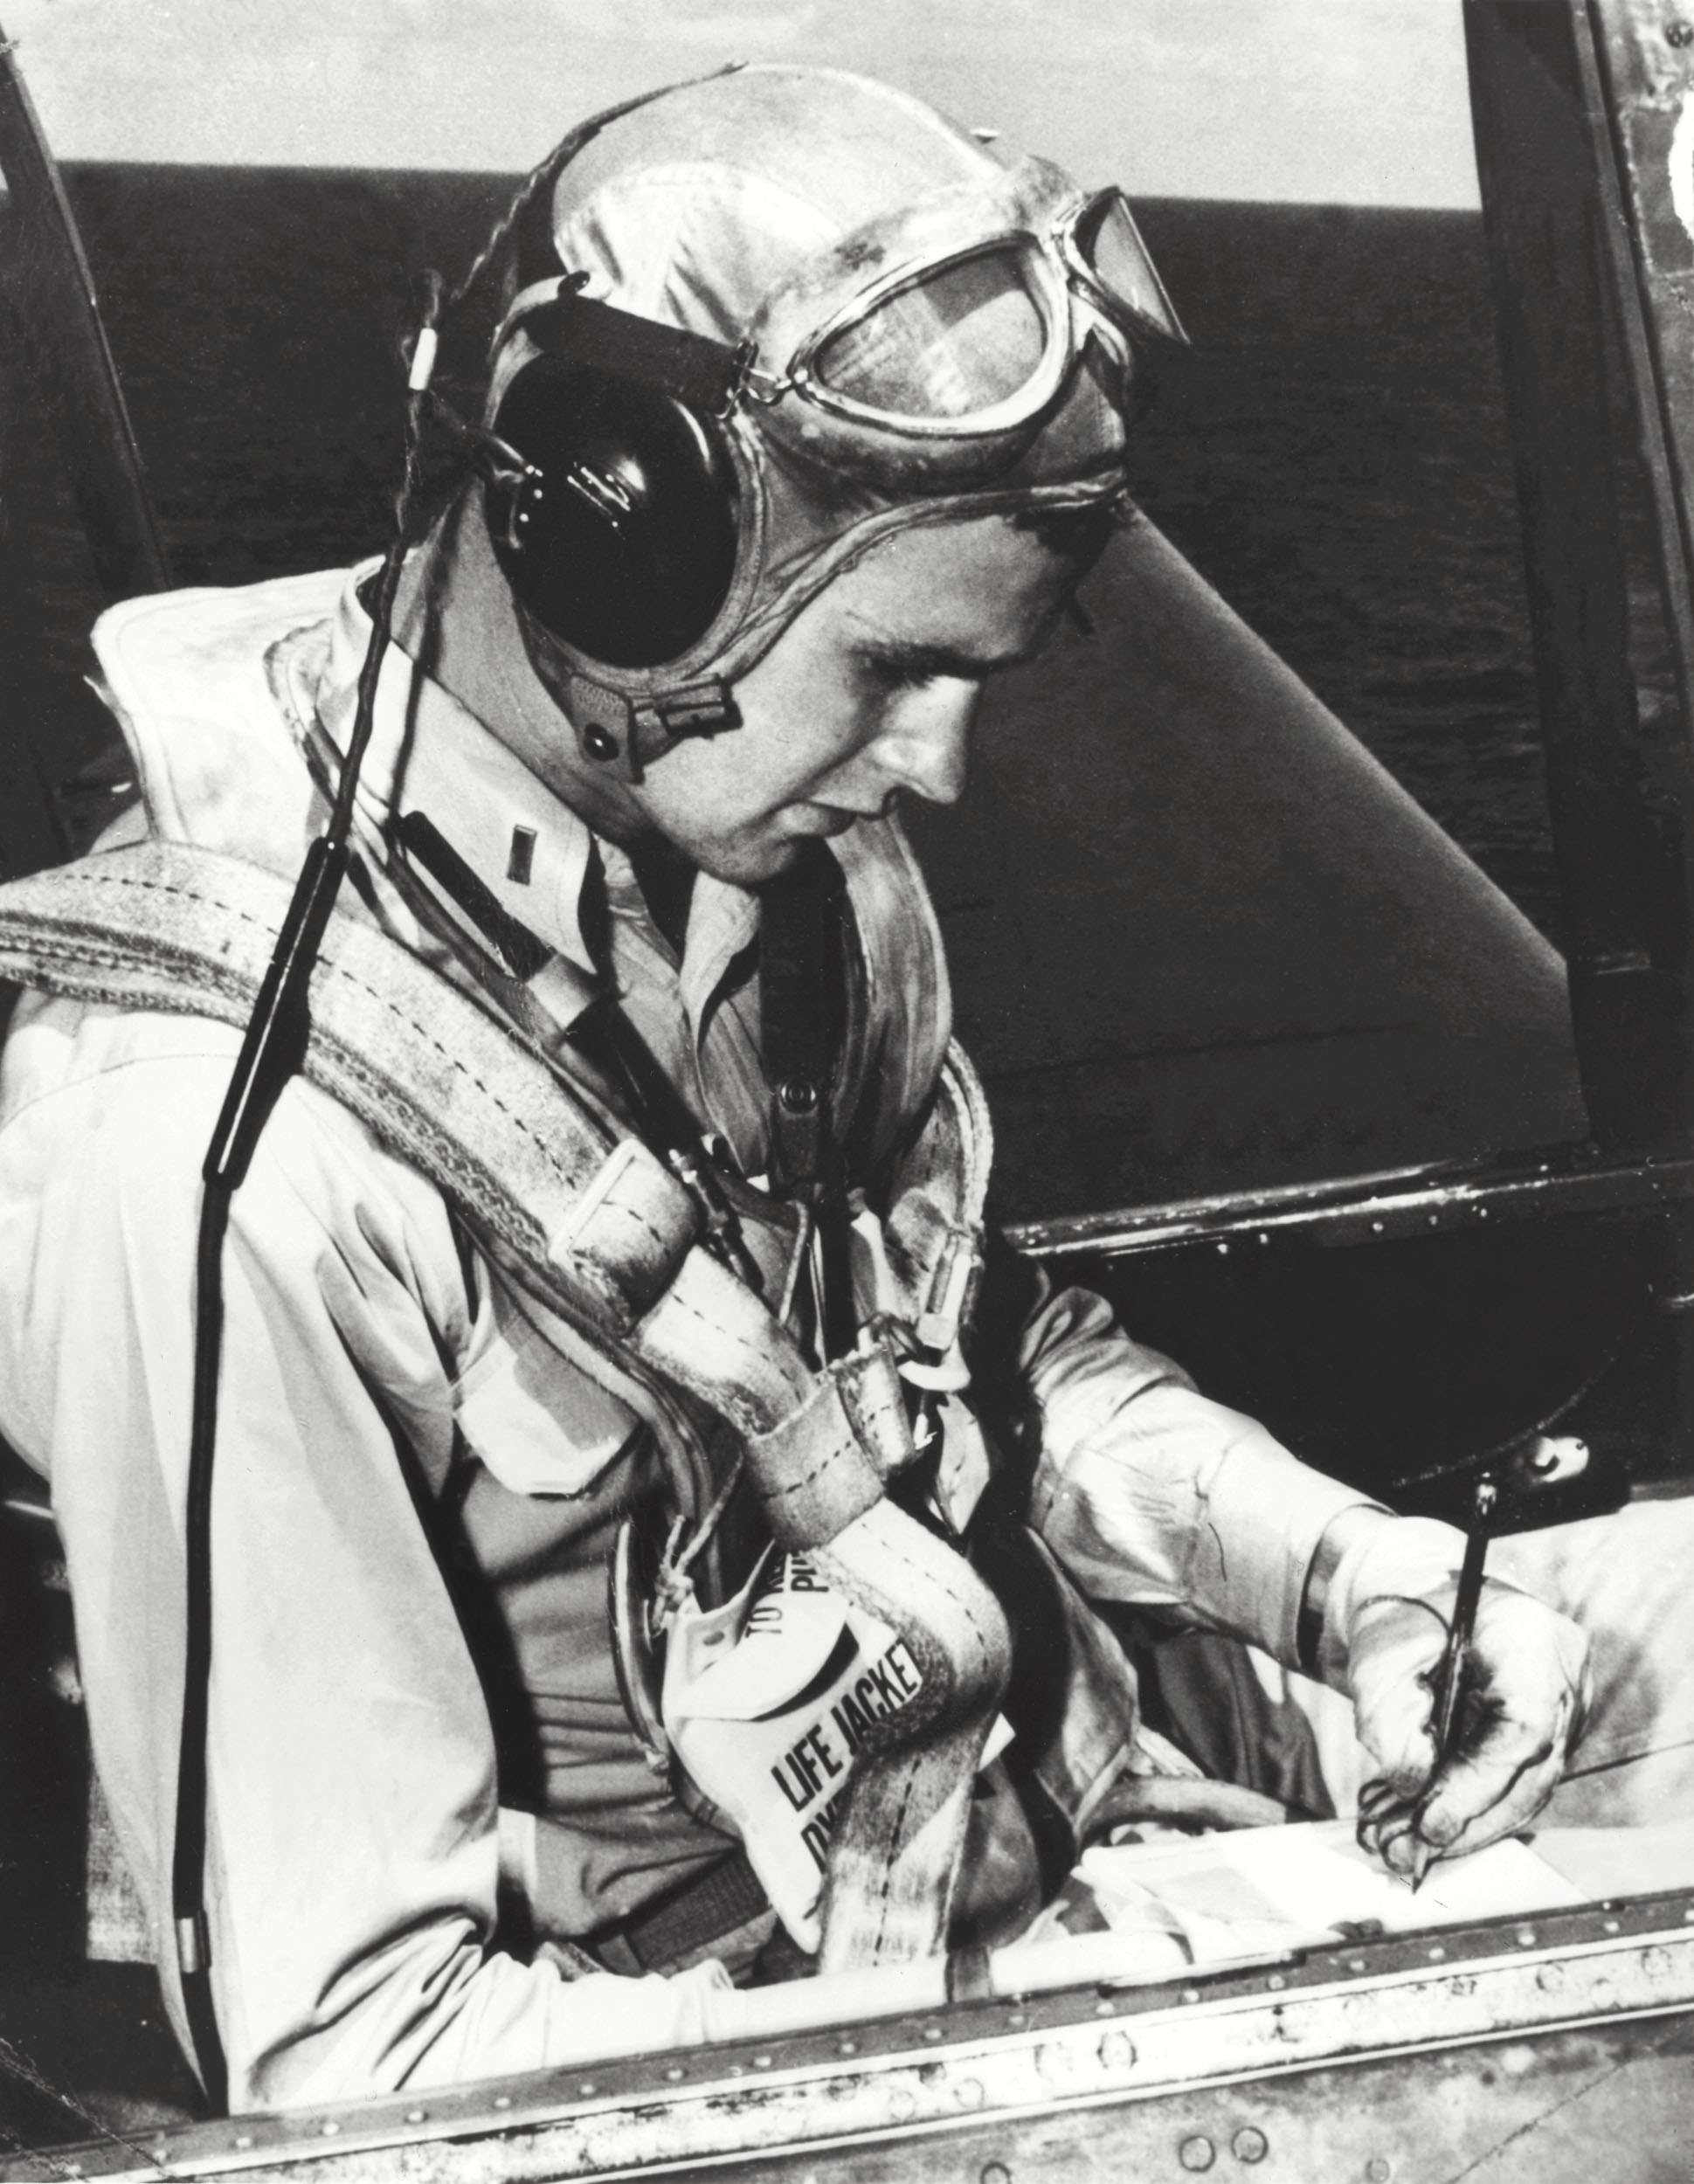 George Herbert Walker Bush is pictured in the cockpit of his TBM Avenger during the World War II. Born 12 June 1924 in Milton, Massachussetts, George Bush Yale graduated with a degree in Economics in 1948, made a fortune drilling oil before entering politics in 1964. US Congressman from Texas (1966-1970), ambassador to the United nations (1971-1974), Special Envoy to China (1974-1975), Republican National Chairman (1975-1976), Central Intelligence Agency (CIA) director (1976-1977), vice president of the US (1981-1959) George Bush is eventually elected president of the US 08 November 1988 against Democratic nominee Michael Dukakis. AFP PHOTO/WHITE HOUSE (Photo credit should read /AFP/Getty Images)